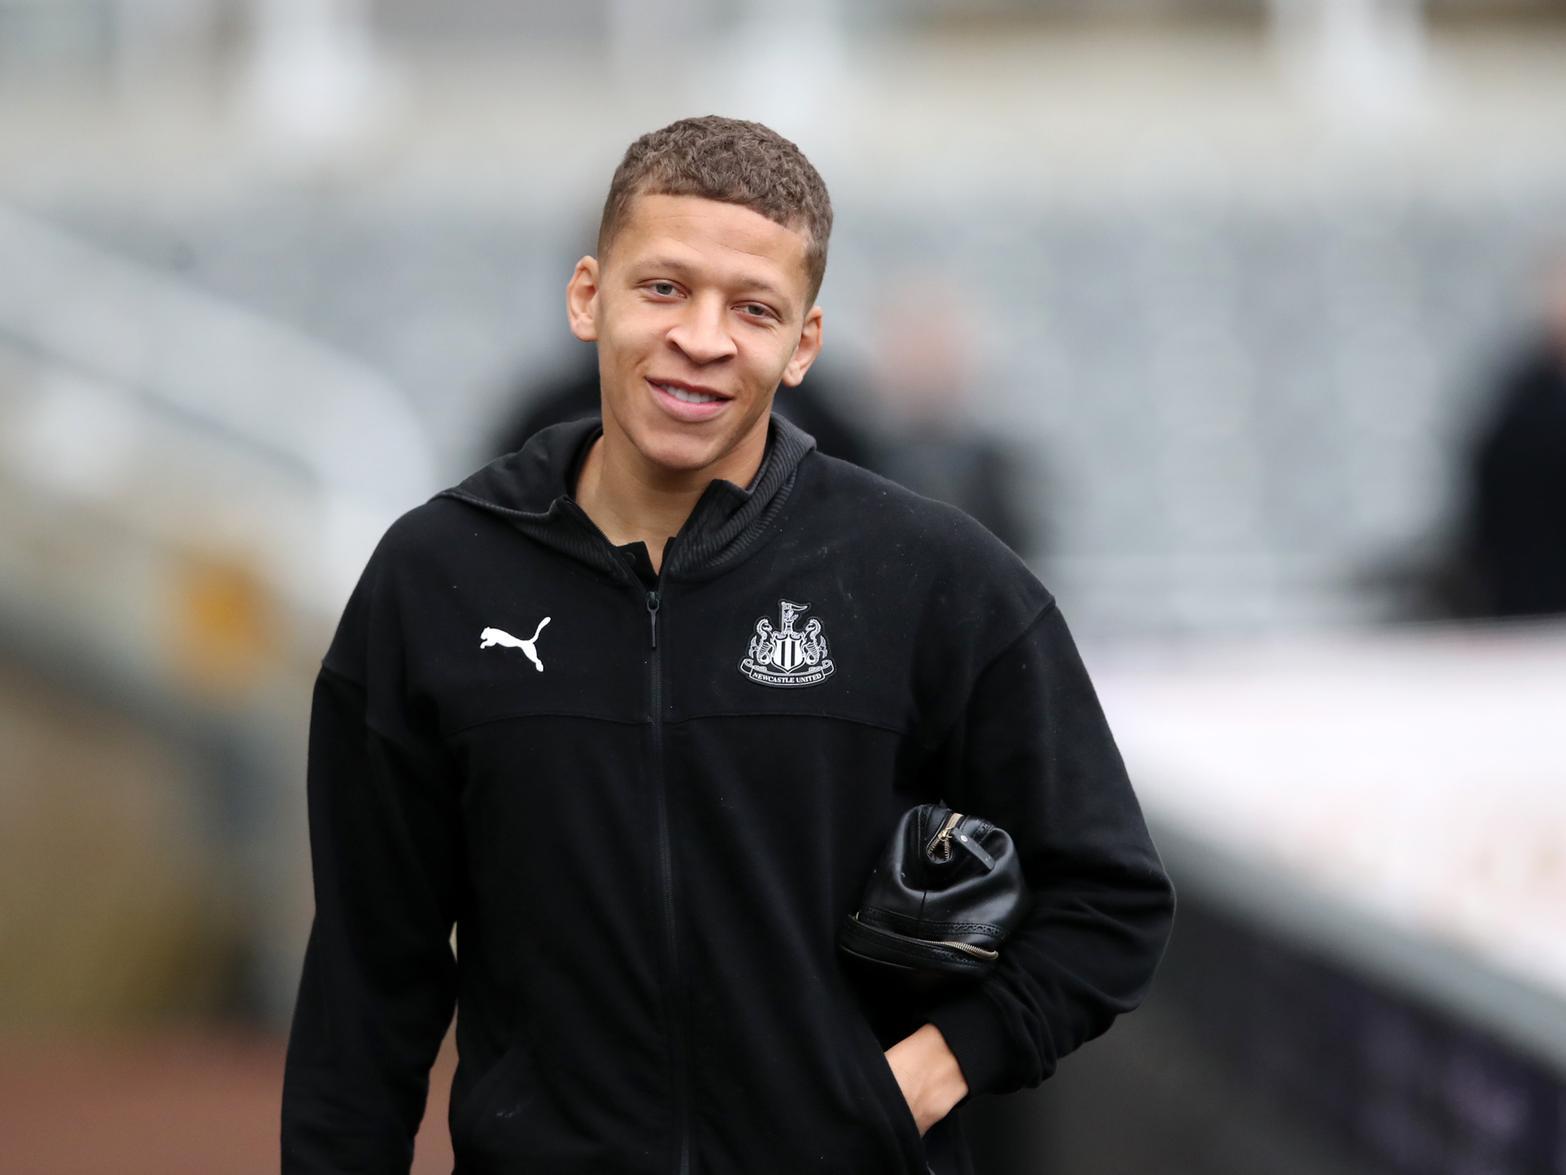 Newcastle United's striker Dwight Gayle has been linked with Championship promotion hopefuls Preston. (Lancashire Evening Post)